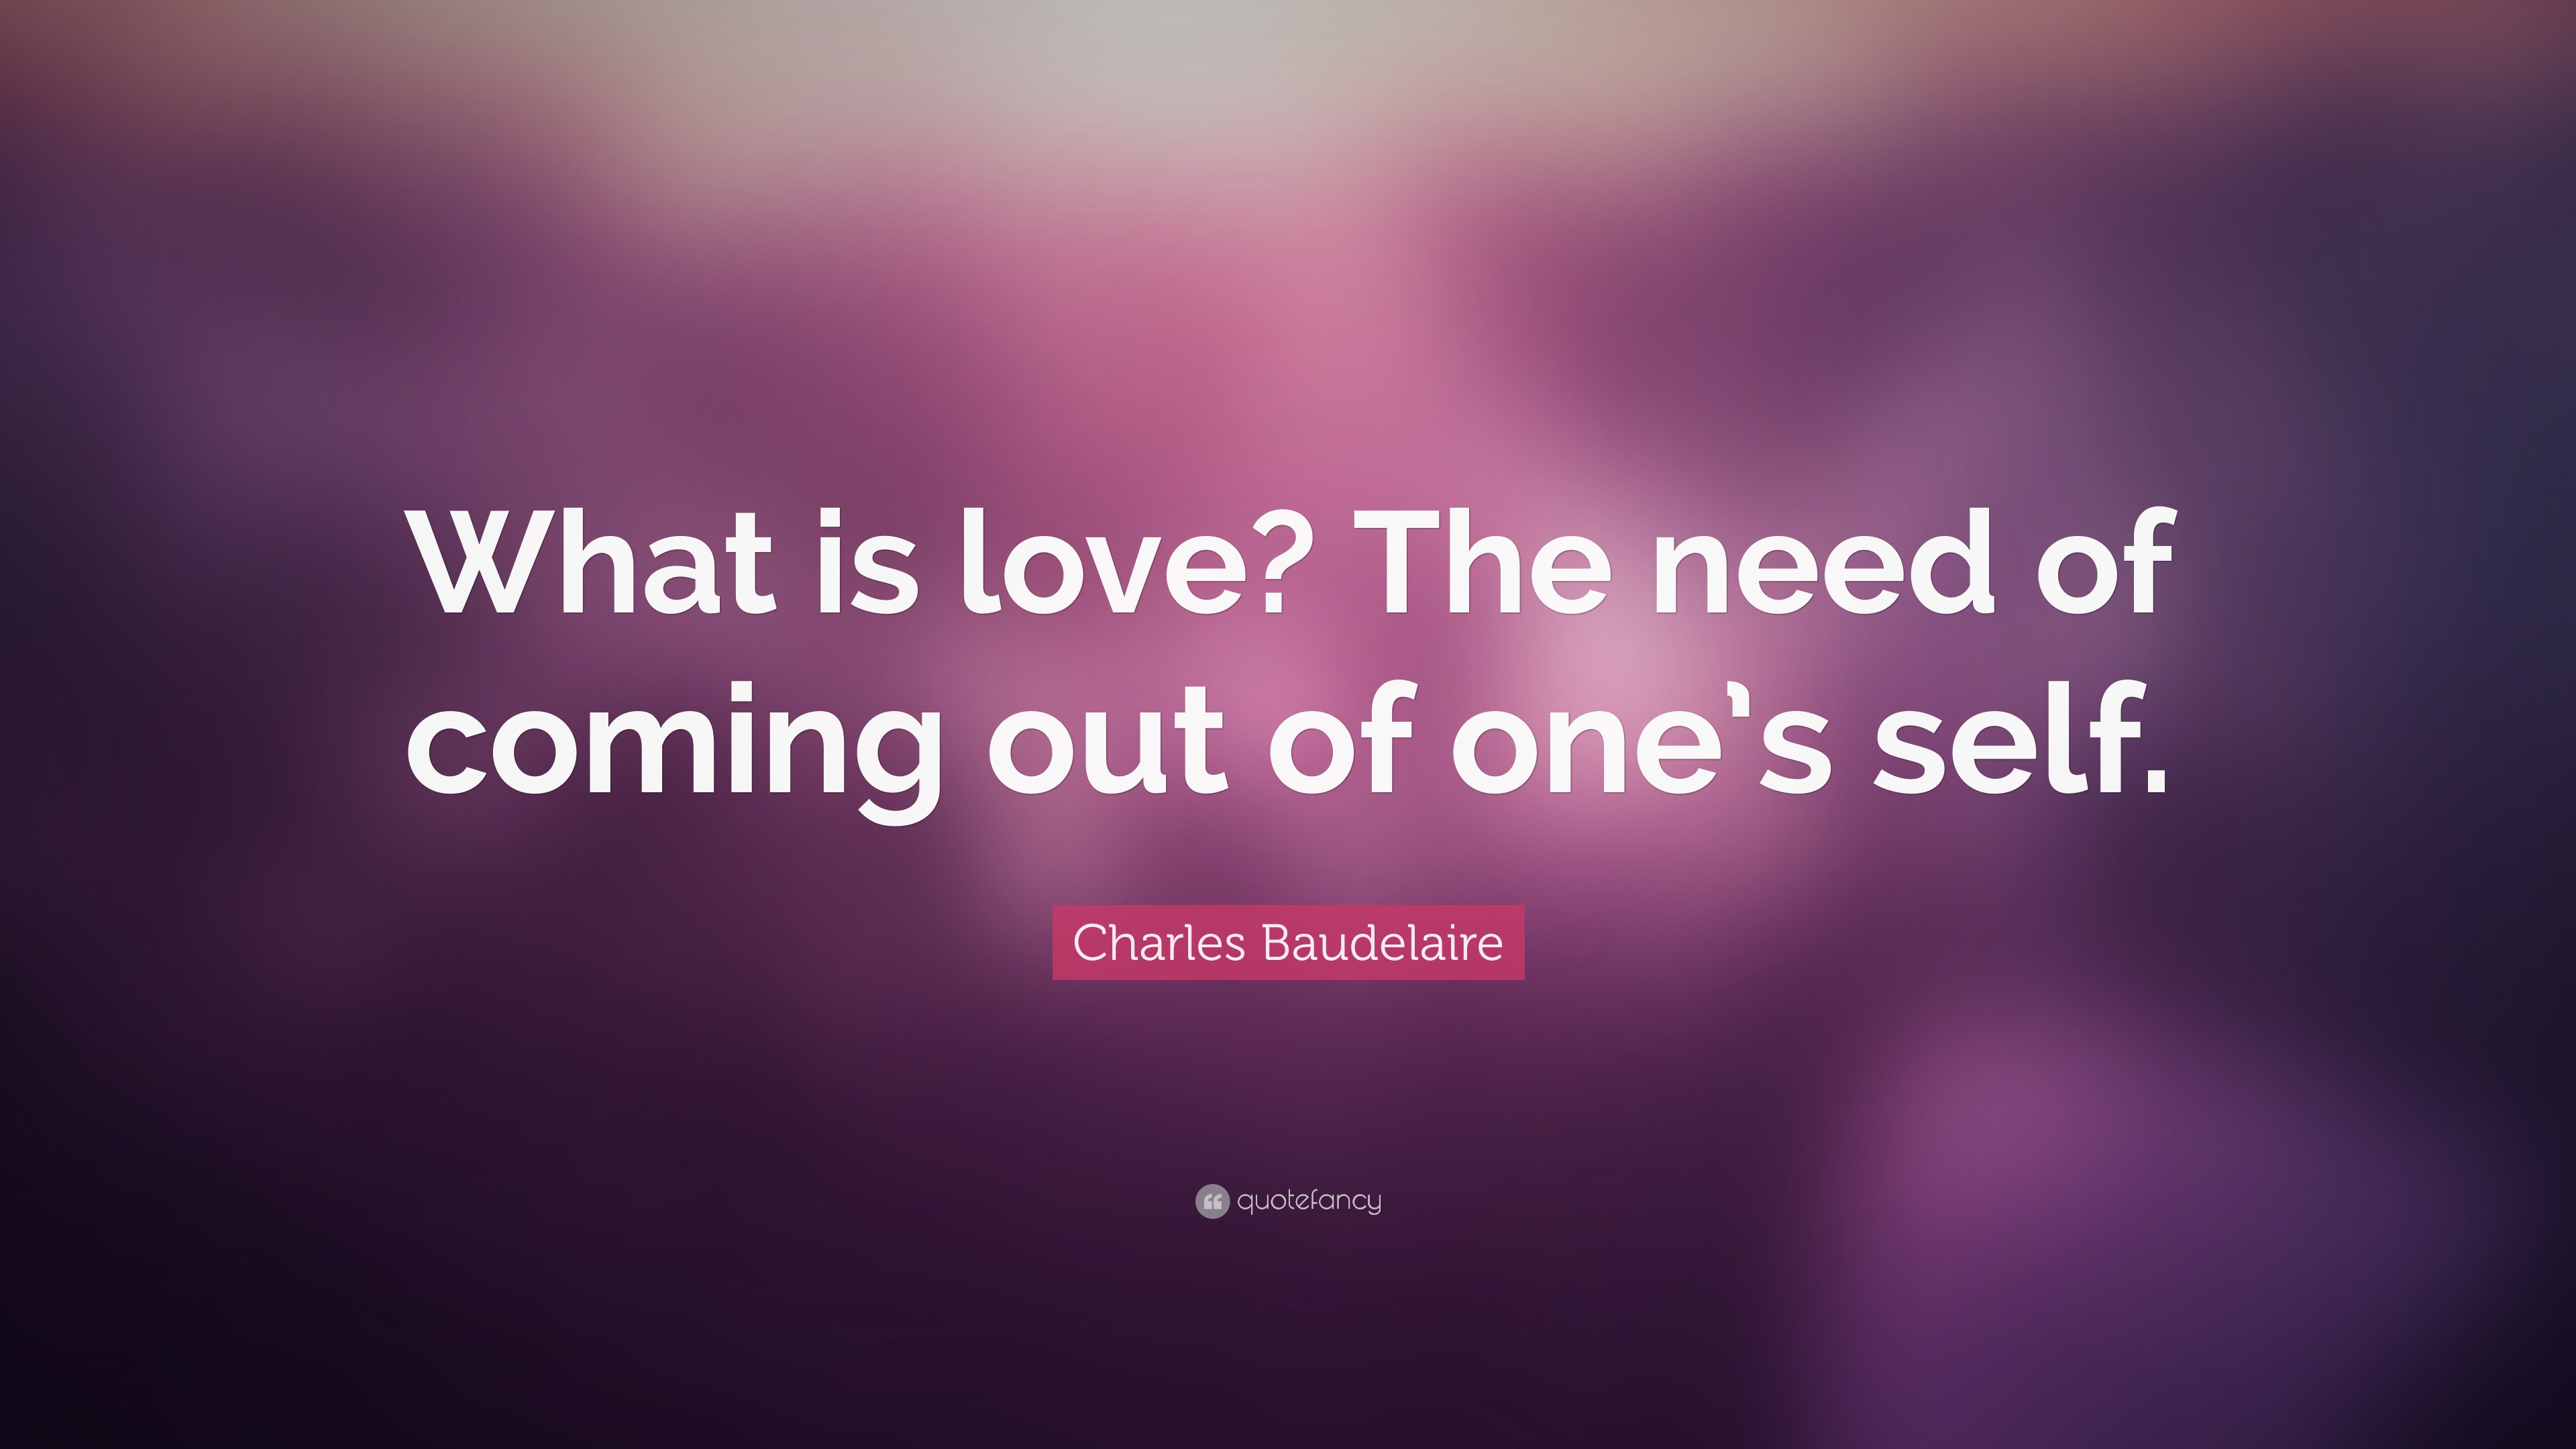 Charles Baudelaire Quote: “What is love? The need of coming out of one ...